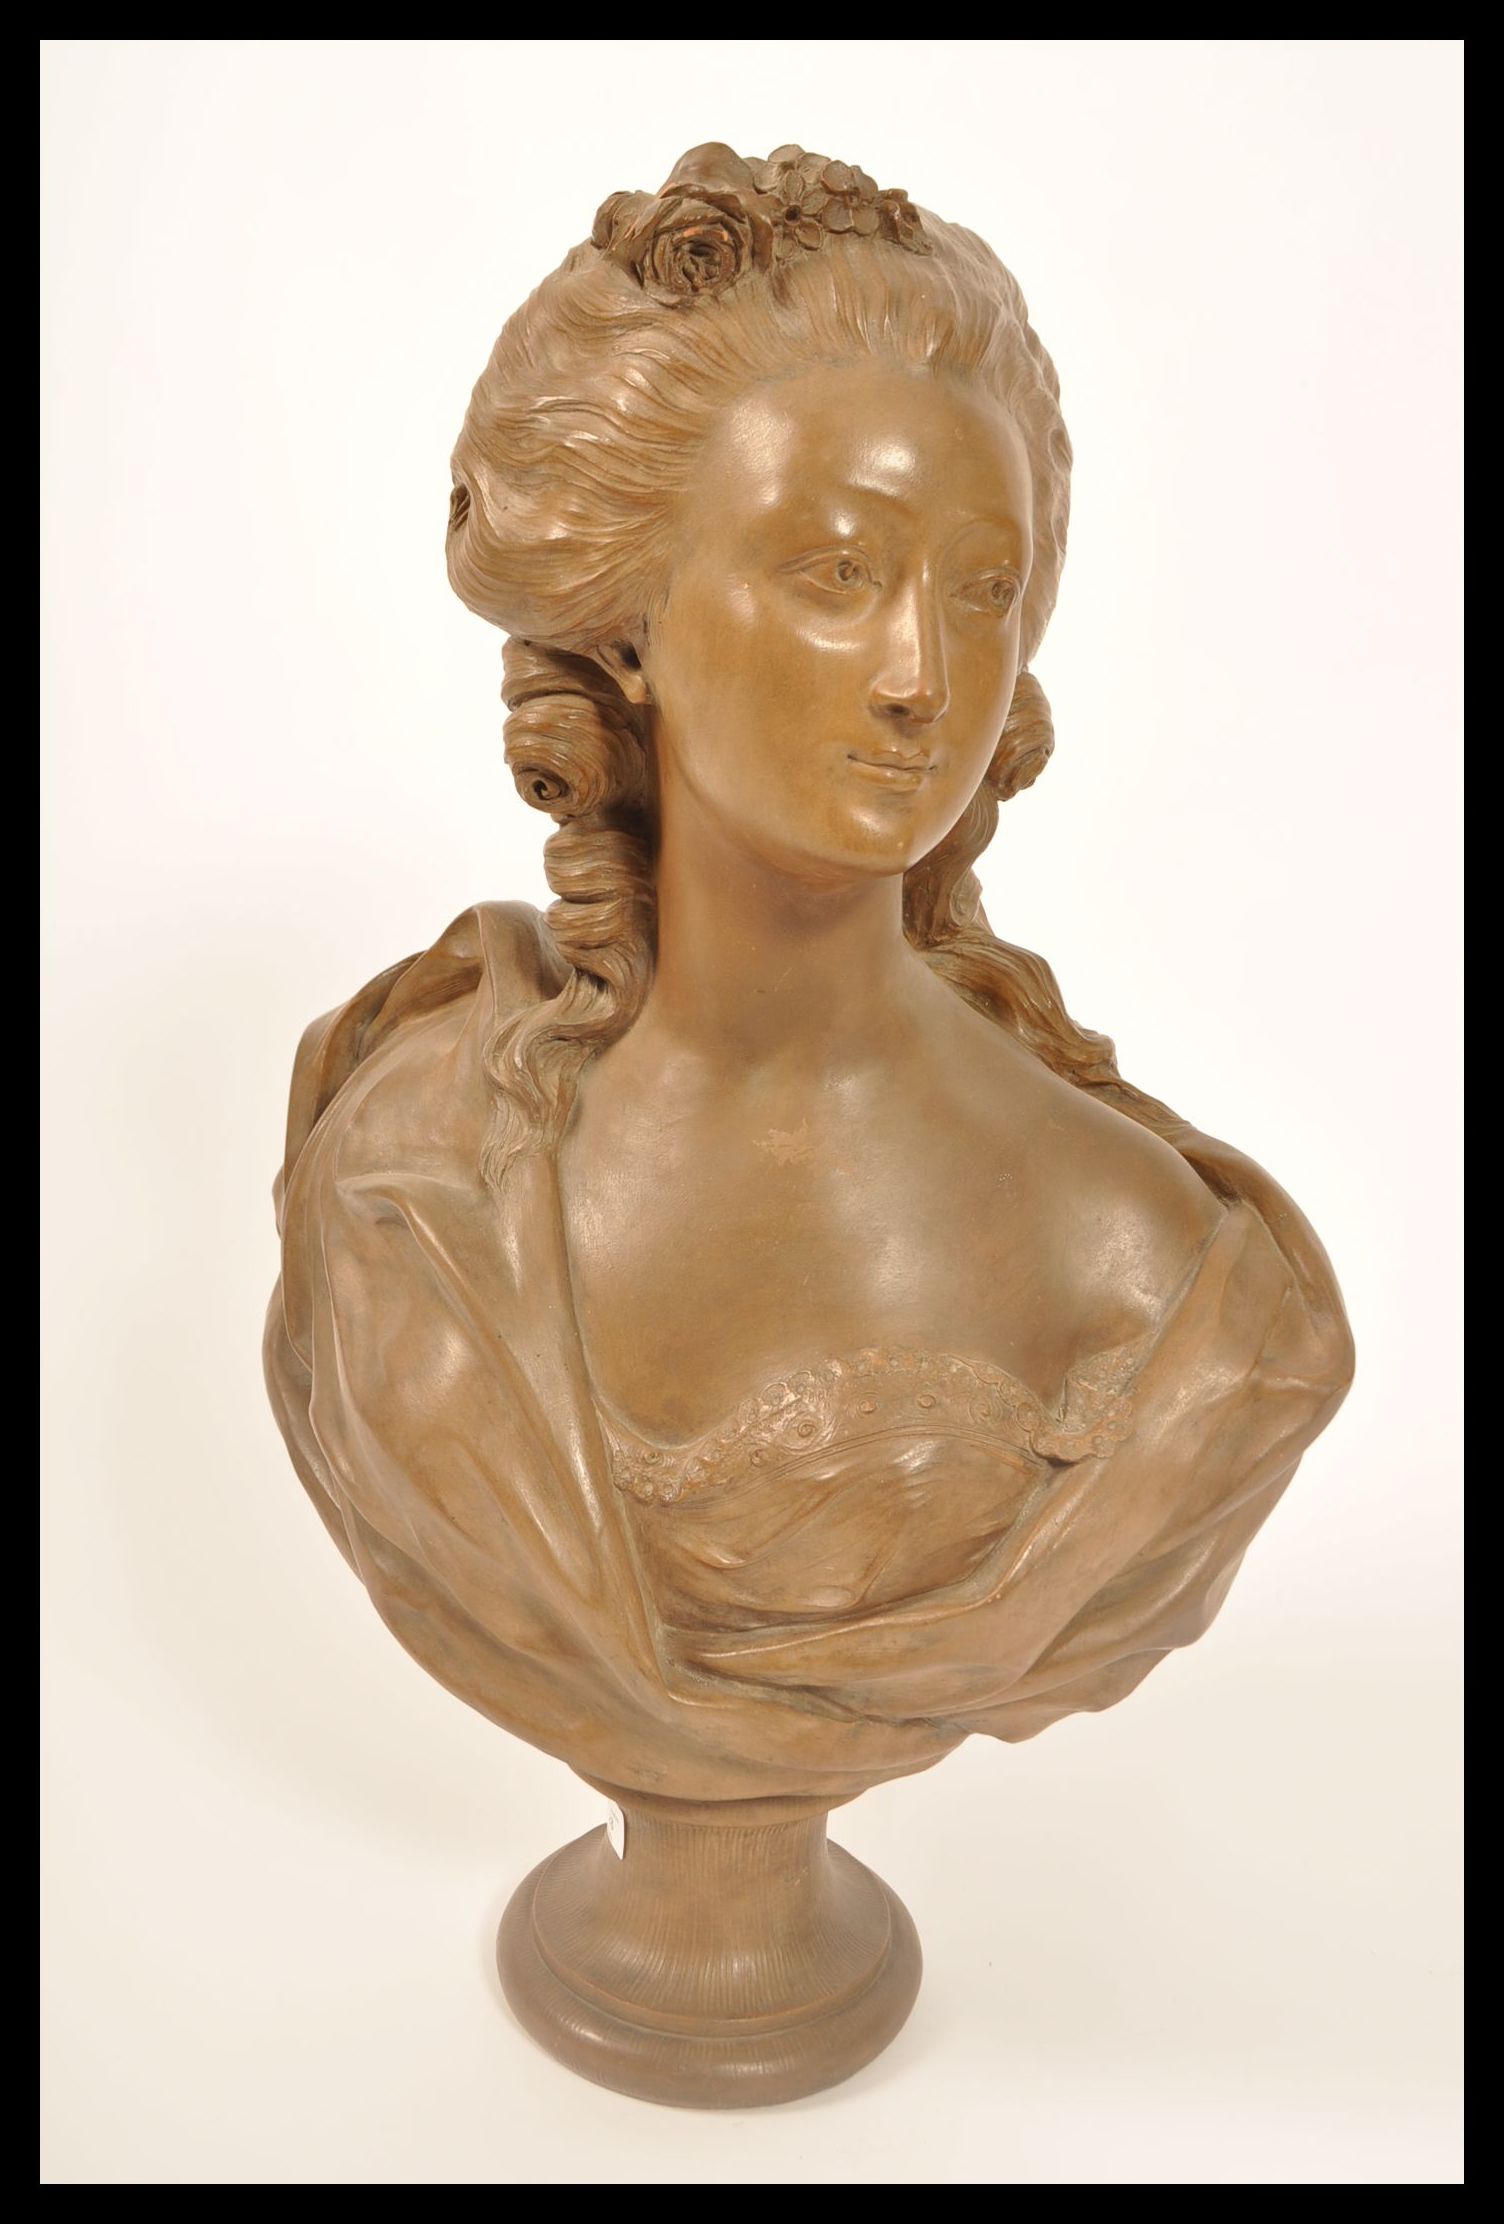 19TH CENTURY LARGE TERRACOTTA BUST AFTER AUGUSTIN PAJOU - Image 3 of 8